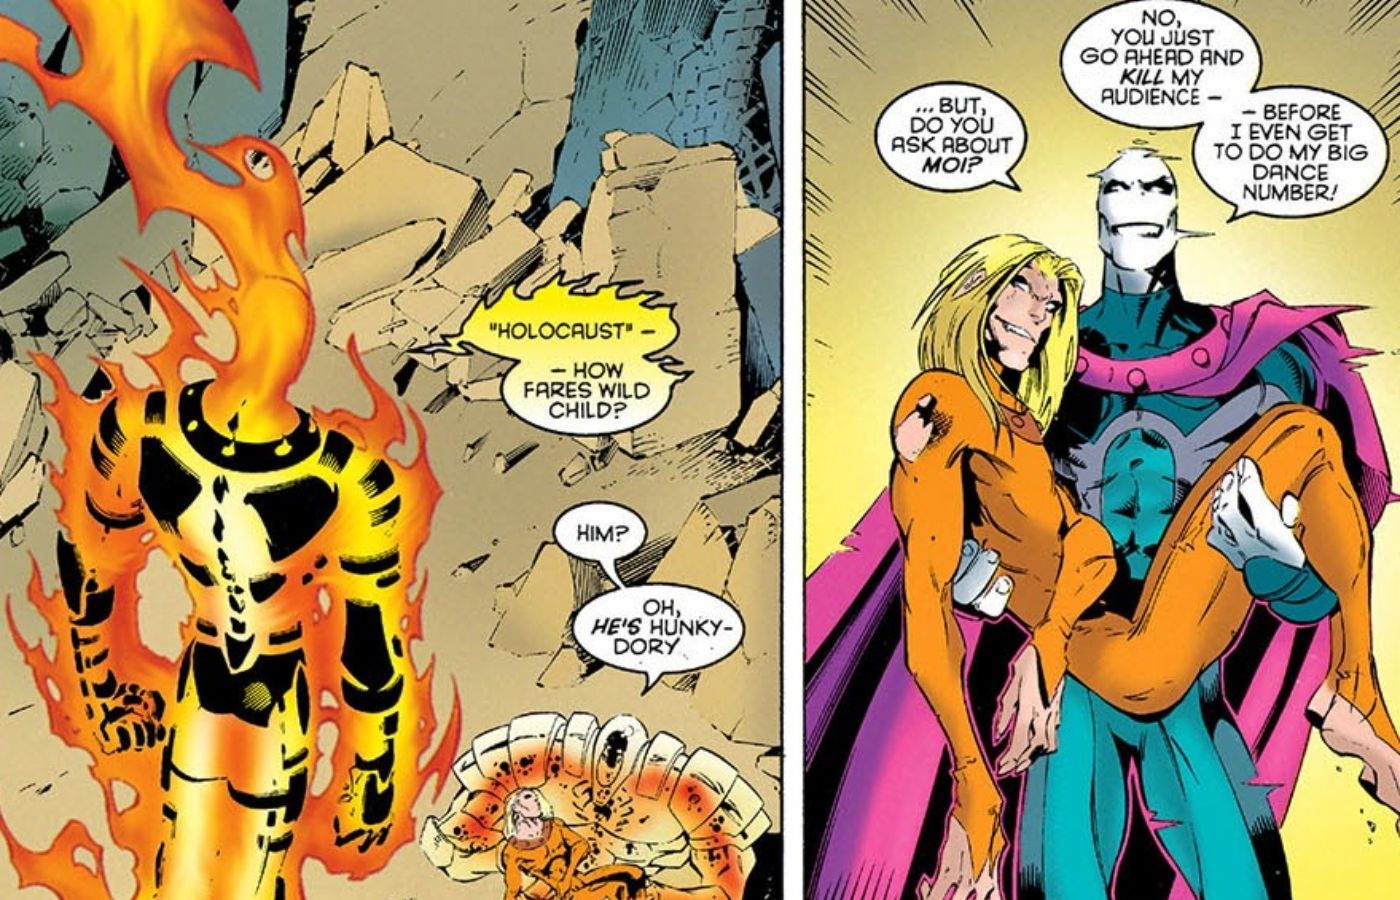 Morph pretending to be Holocaust while holding Wildchild in Age of Apocalypse.